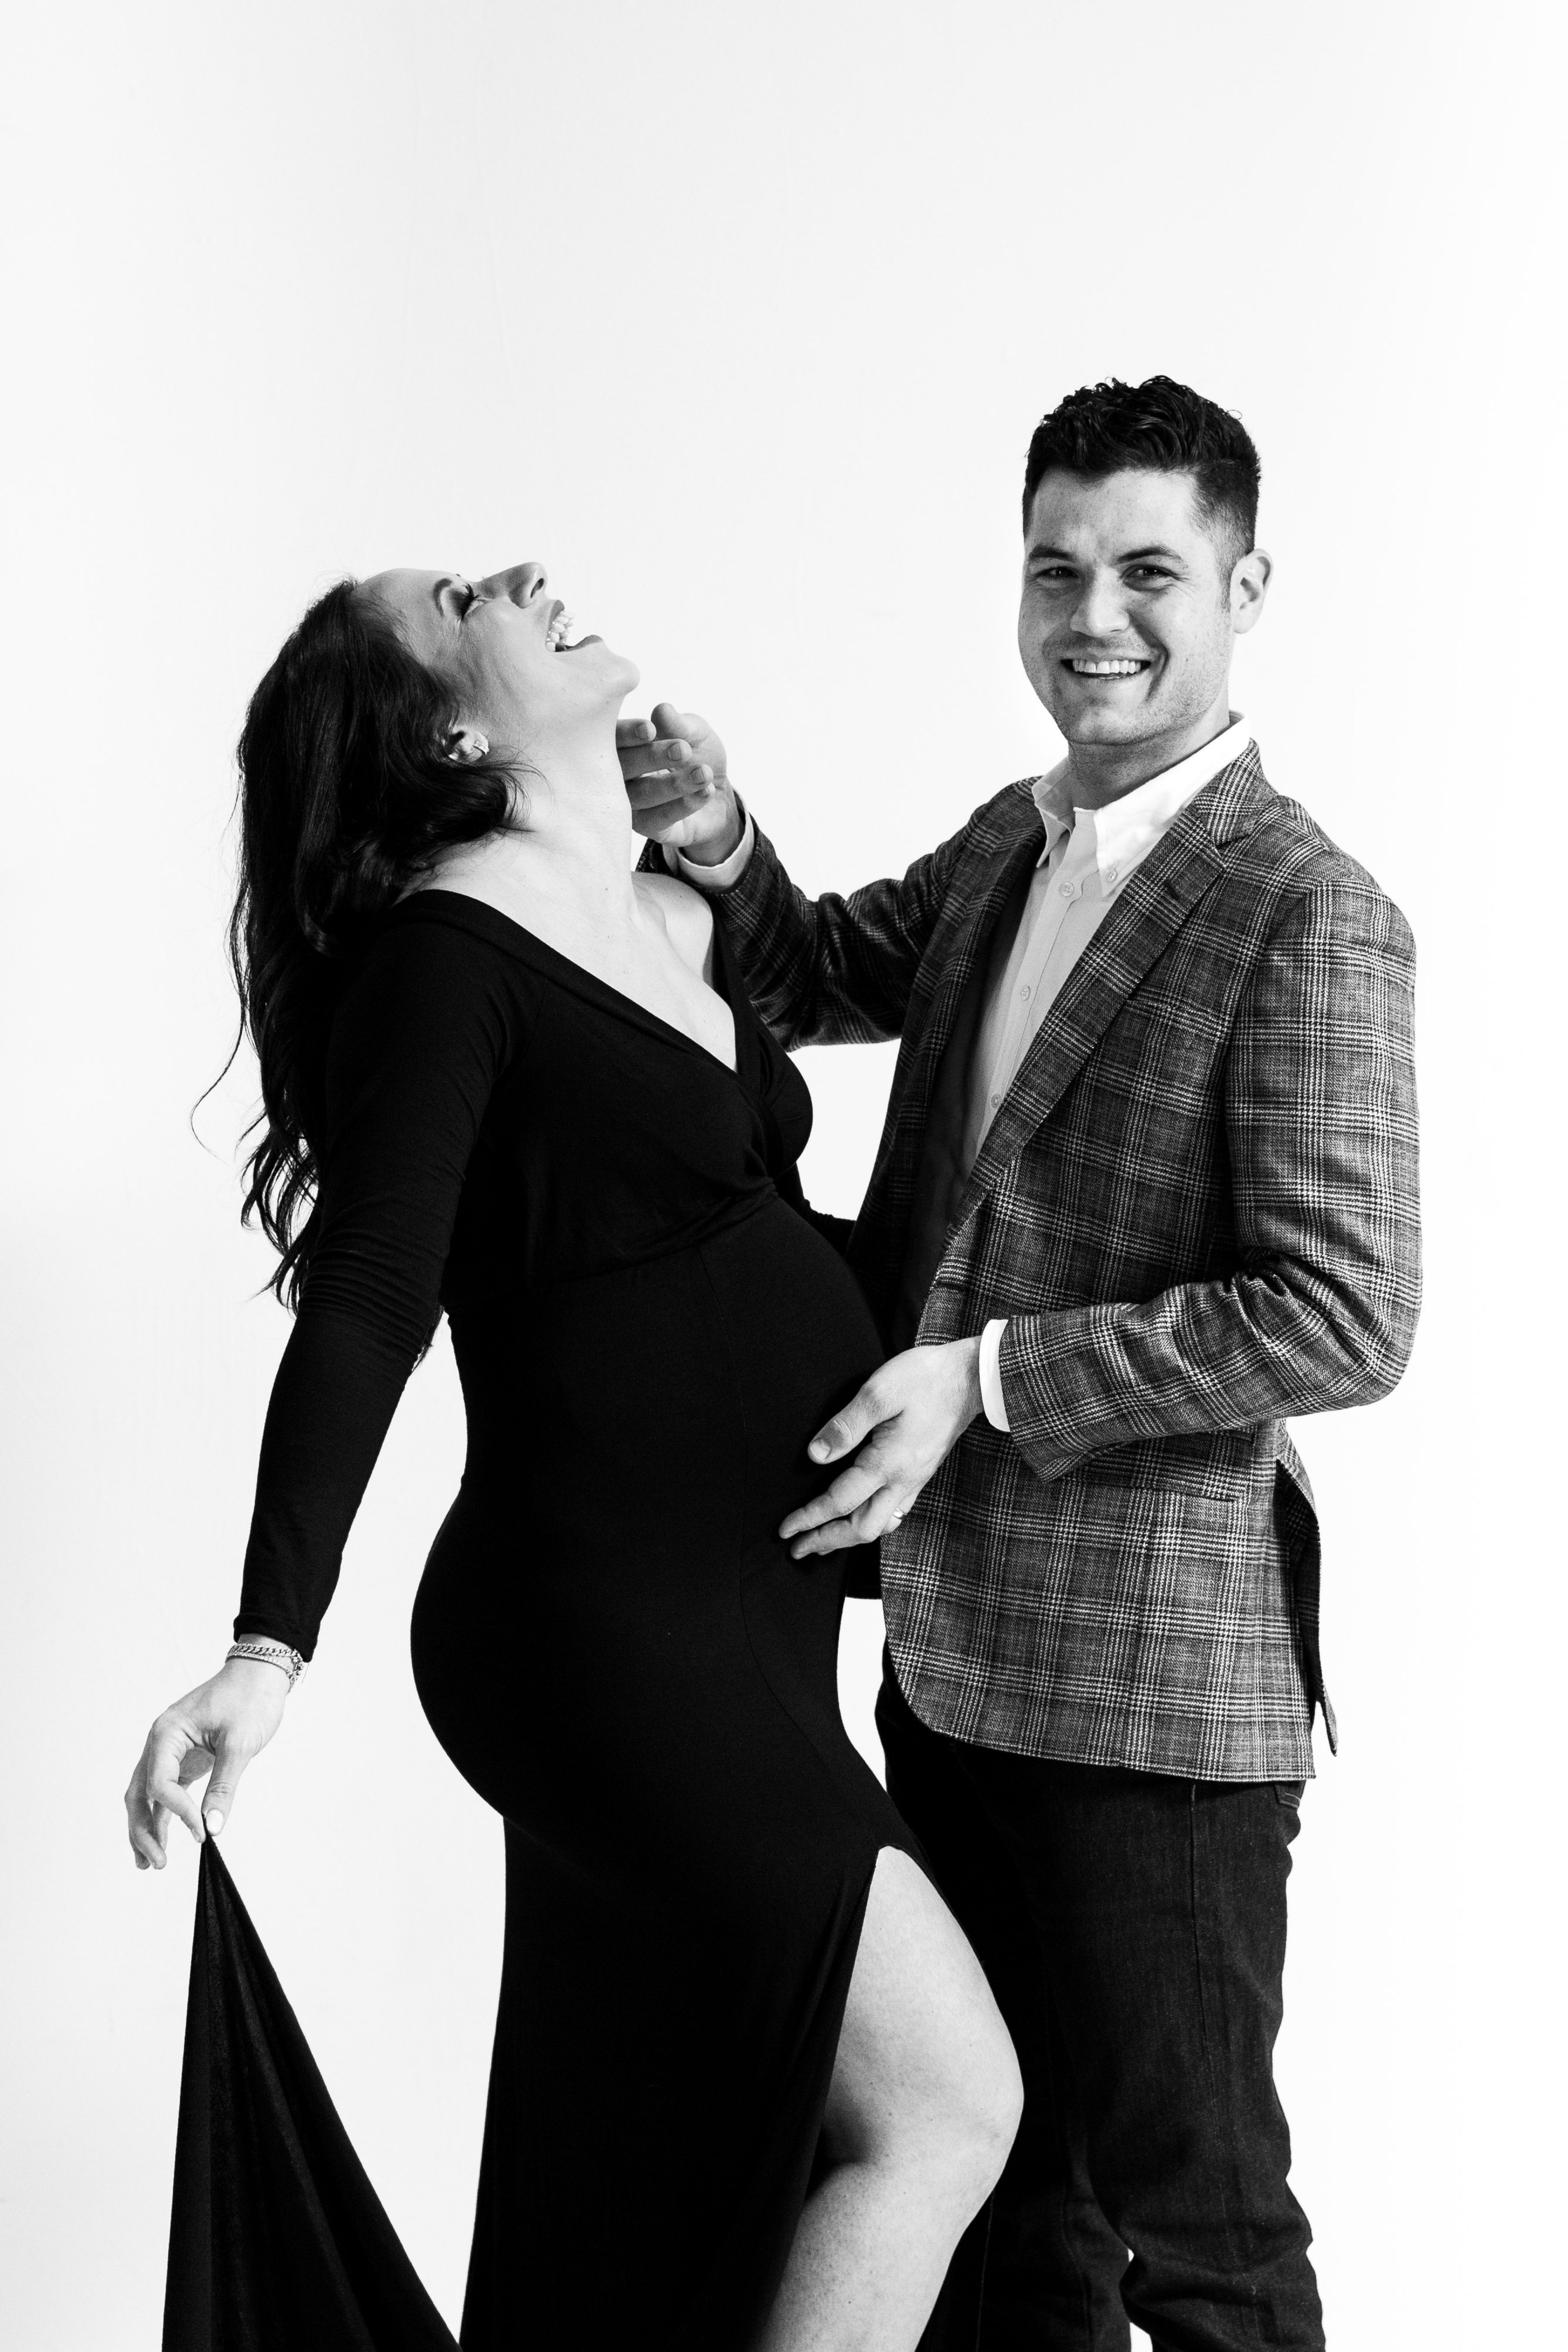 A black maternity photoshoot with a pregnant woman in a dress and a man in a suit.